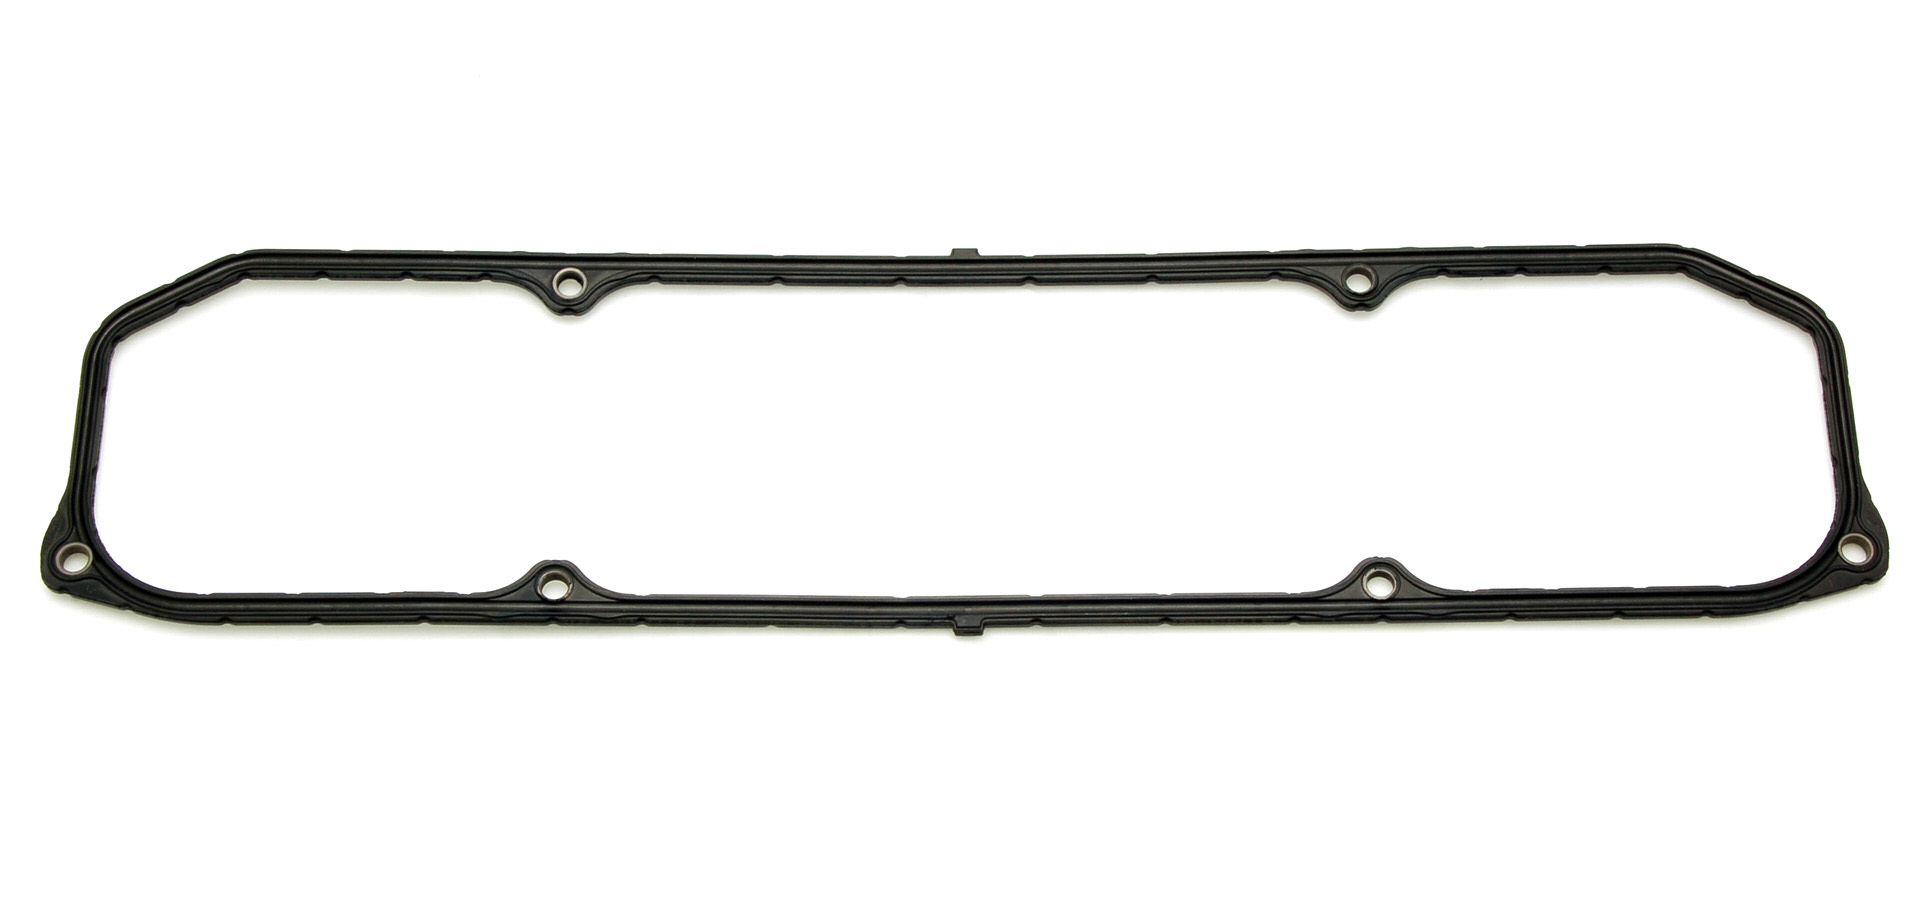 Cometic Gaskets C5983 - Valve Cover Gasket, 0.188 in Thick, Rubber, Mopar B / RB-Series, Each